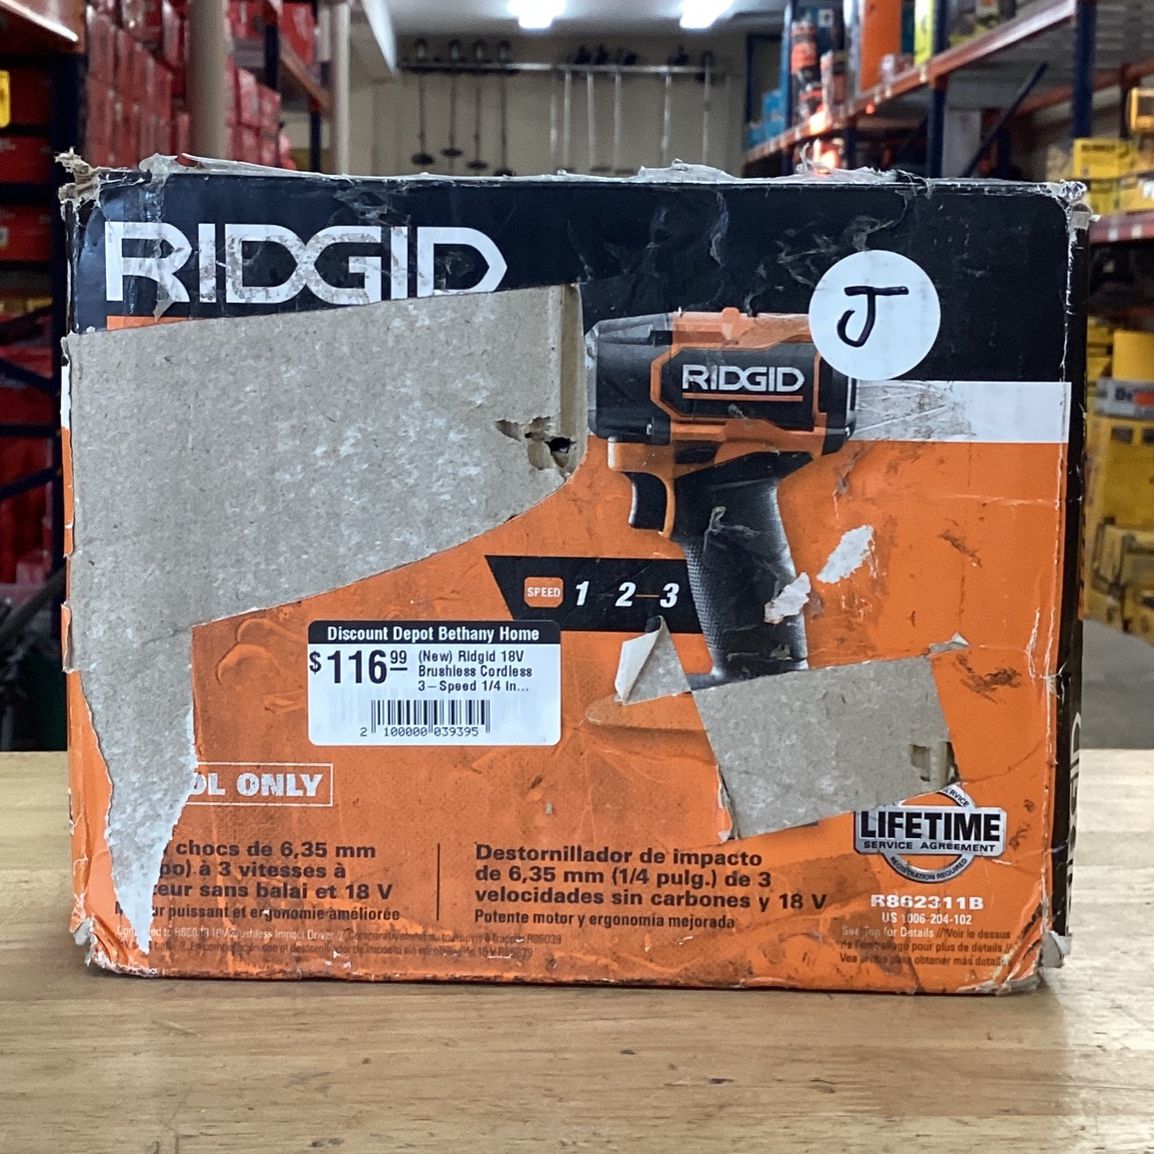 (New) Ridgid 18V Brushless Cordless 3-Speed 1/4 in. Impact Driver (Tool Only)